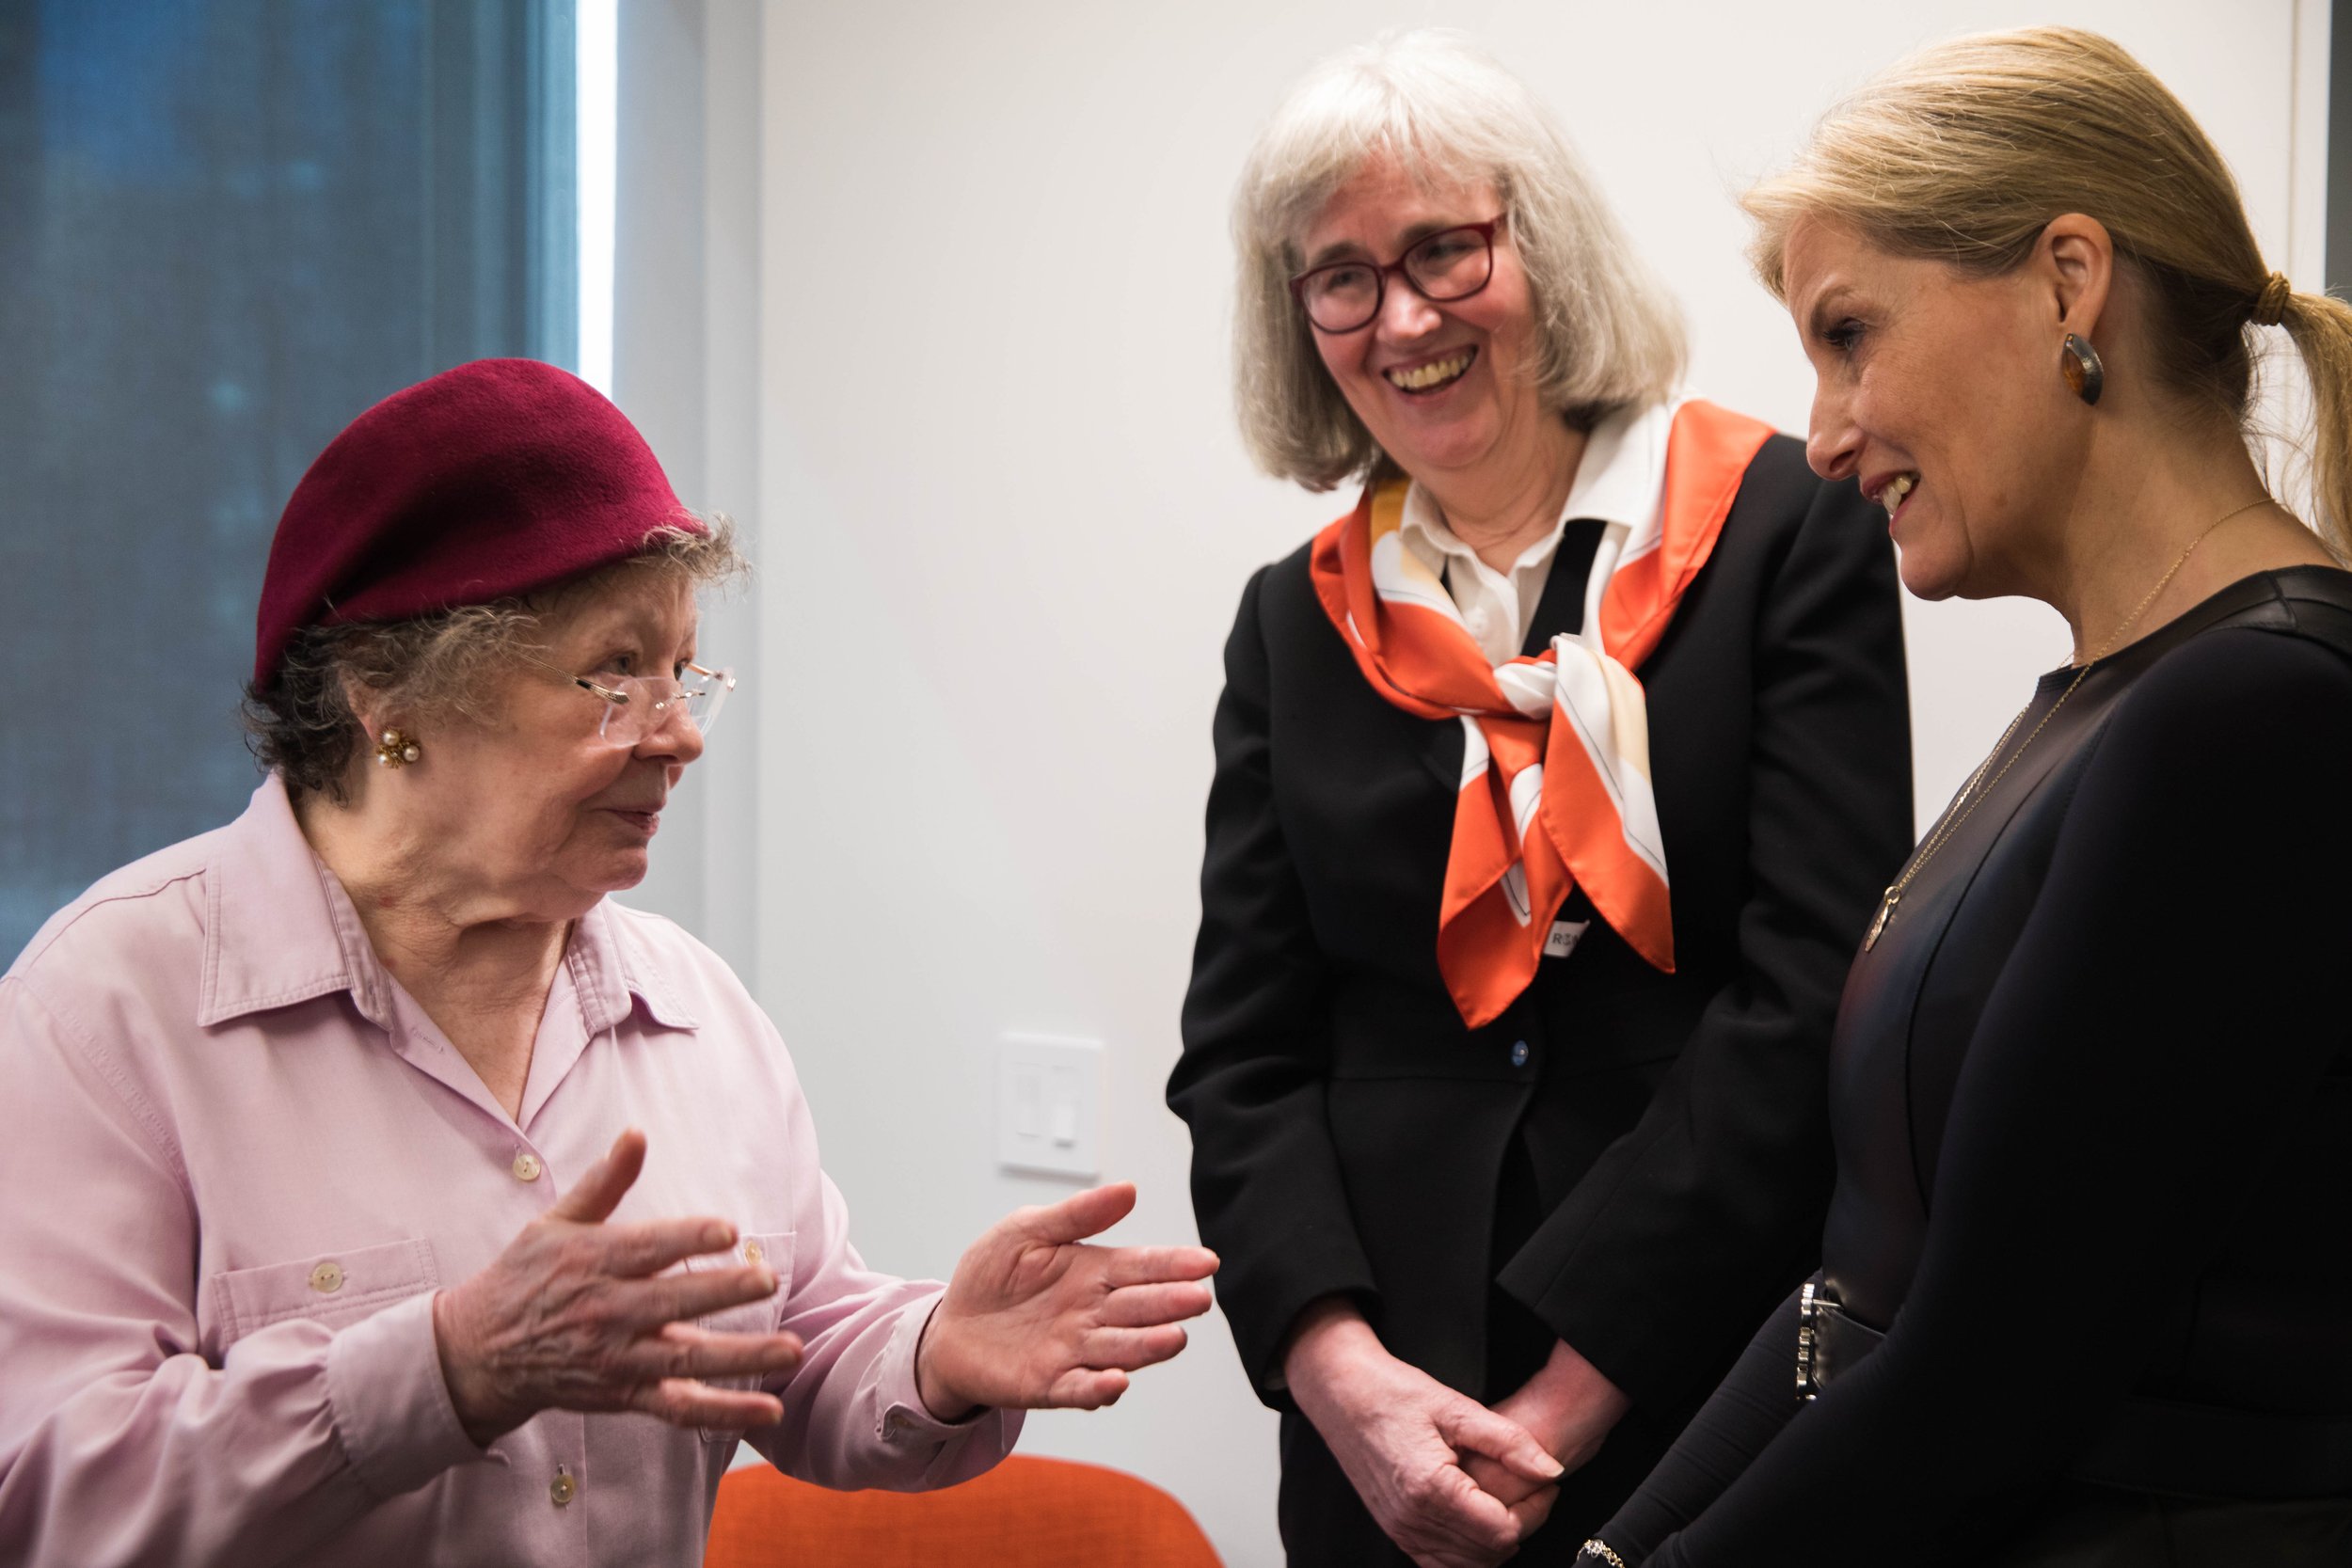  The Countess (R) speaks with an SGSNY senior beneficiary (L) in the presence of one of SGSNY’s social workers (C) 